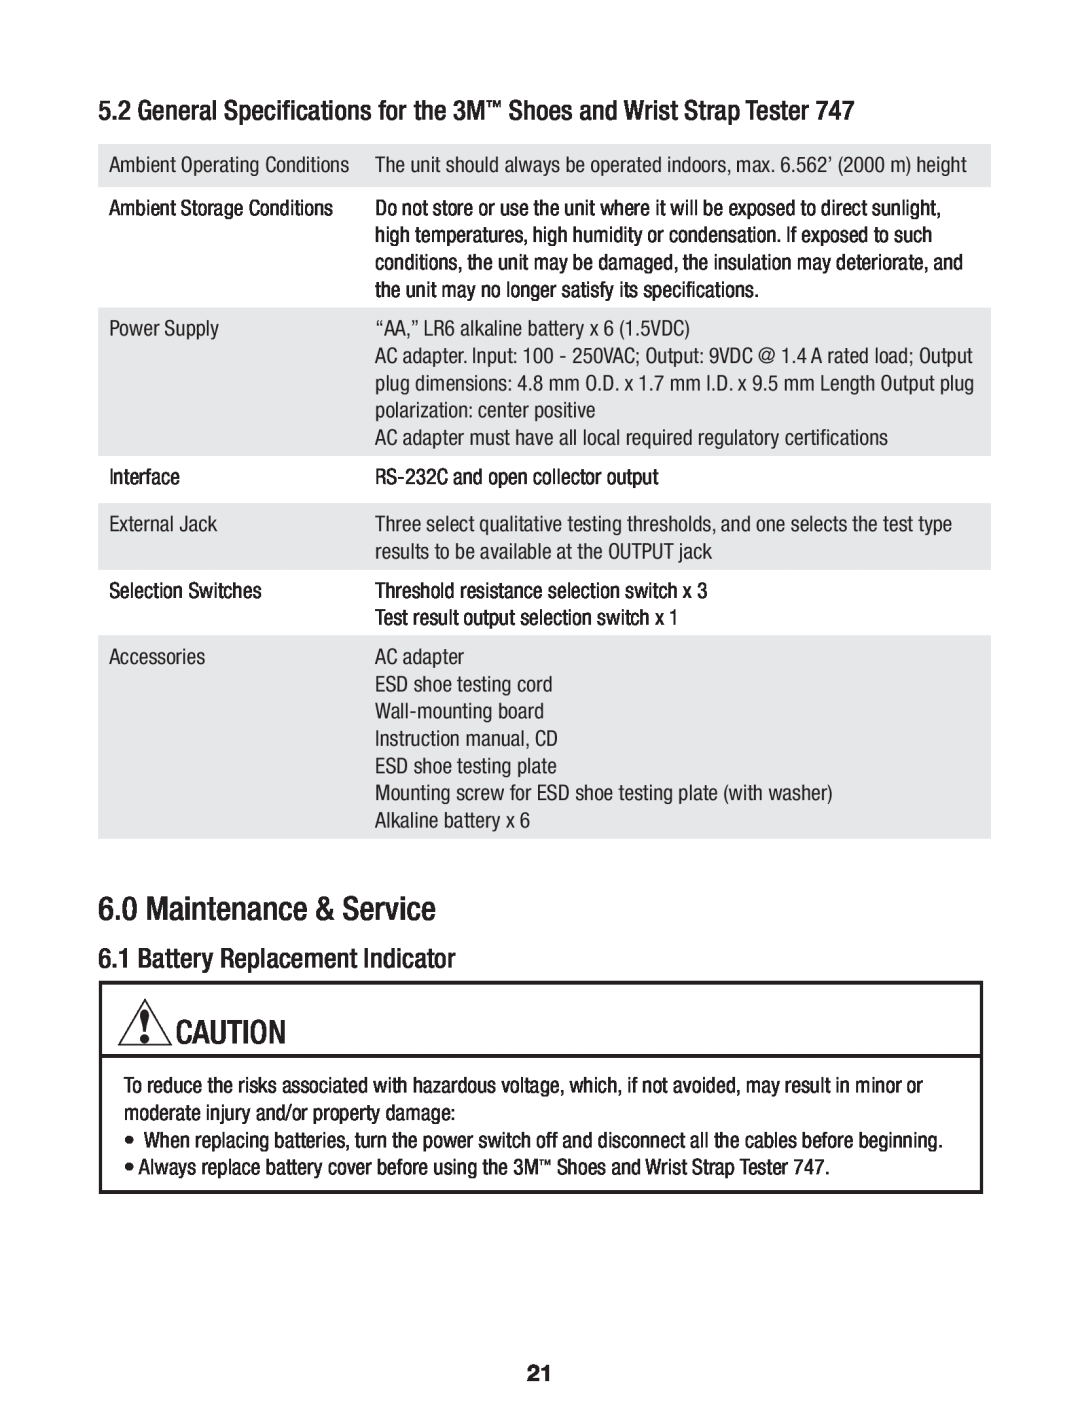 3M 747 manual Maintenance & Service, General Specifications for the 3M Shoes and Wrist Strap Tester 